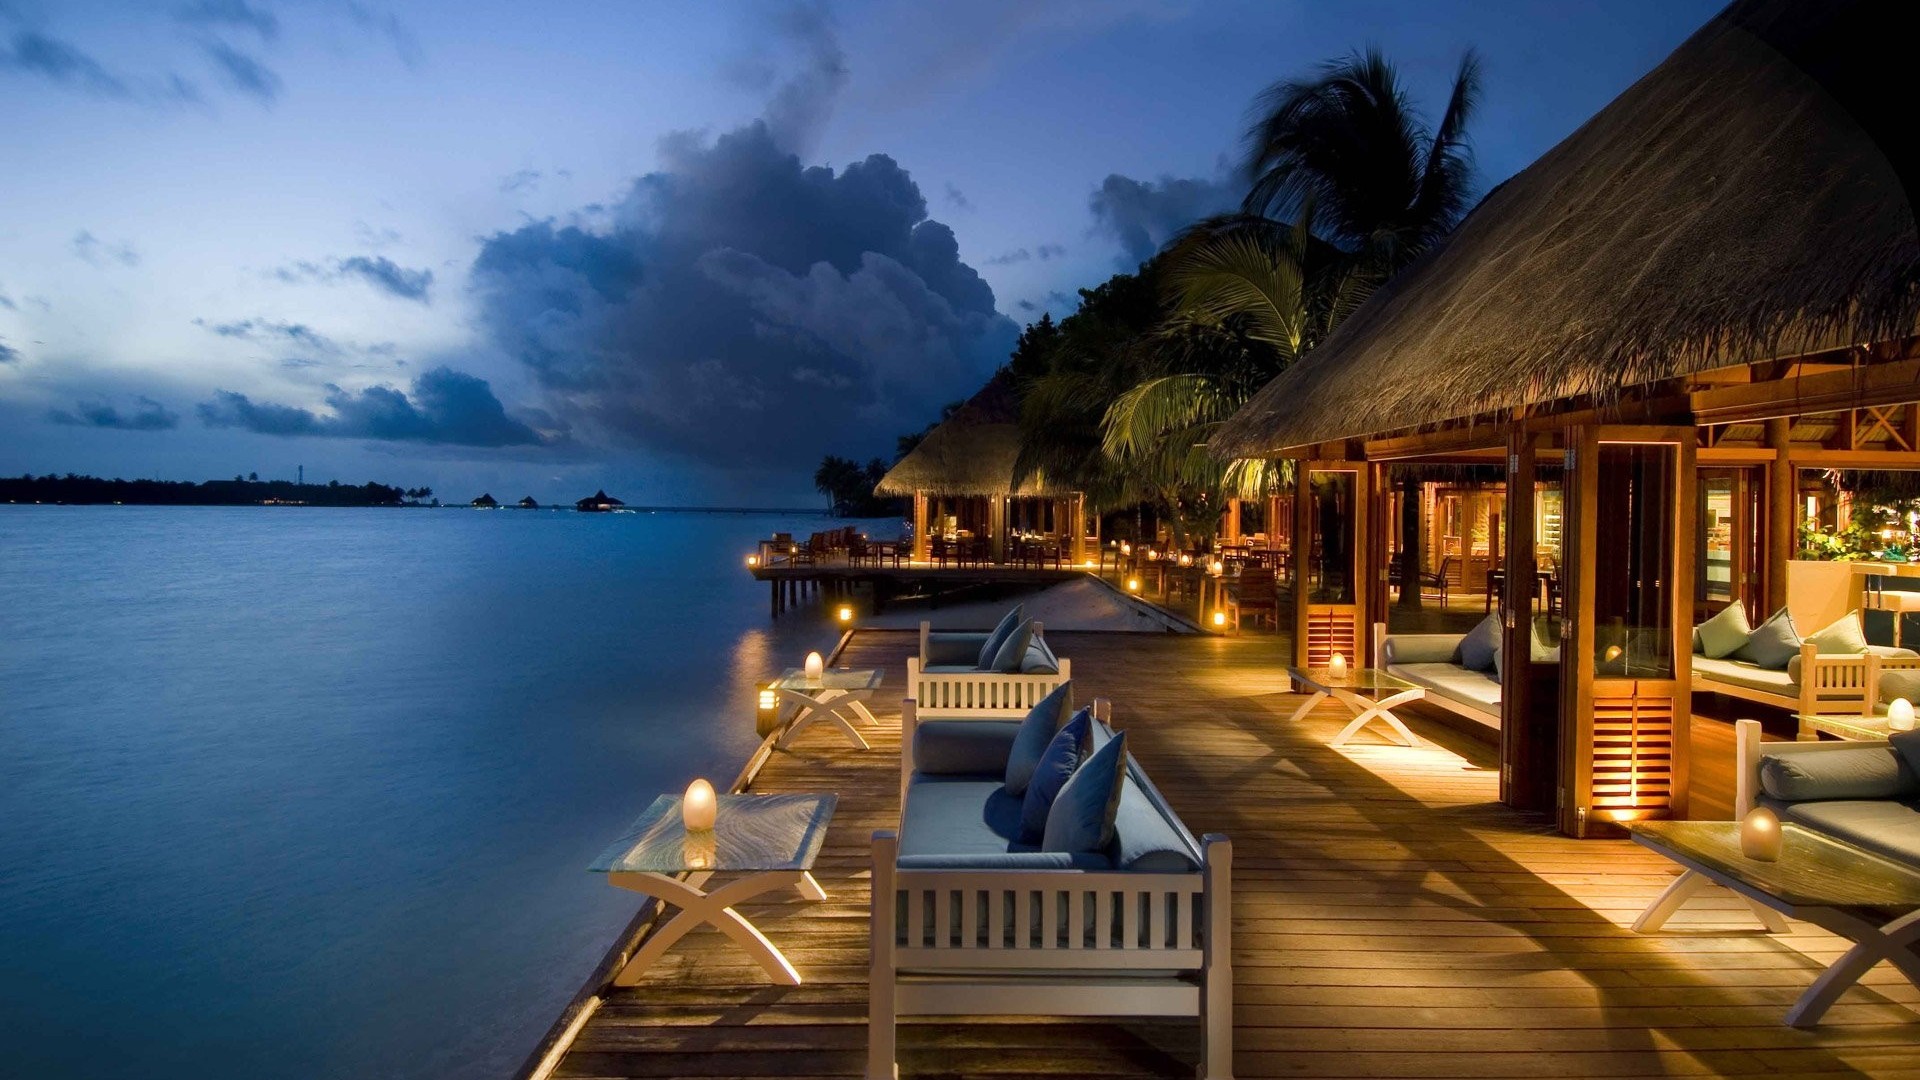 Maldives Resort Wallpaper And Make This For Your Desktop